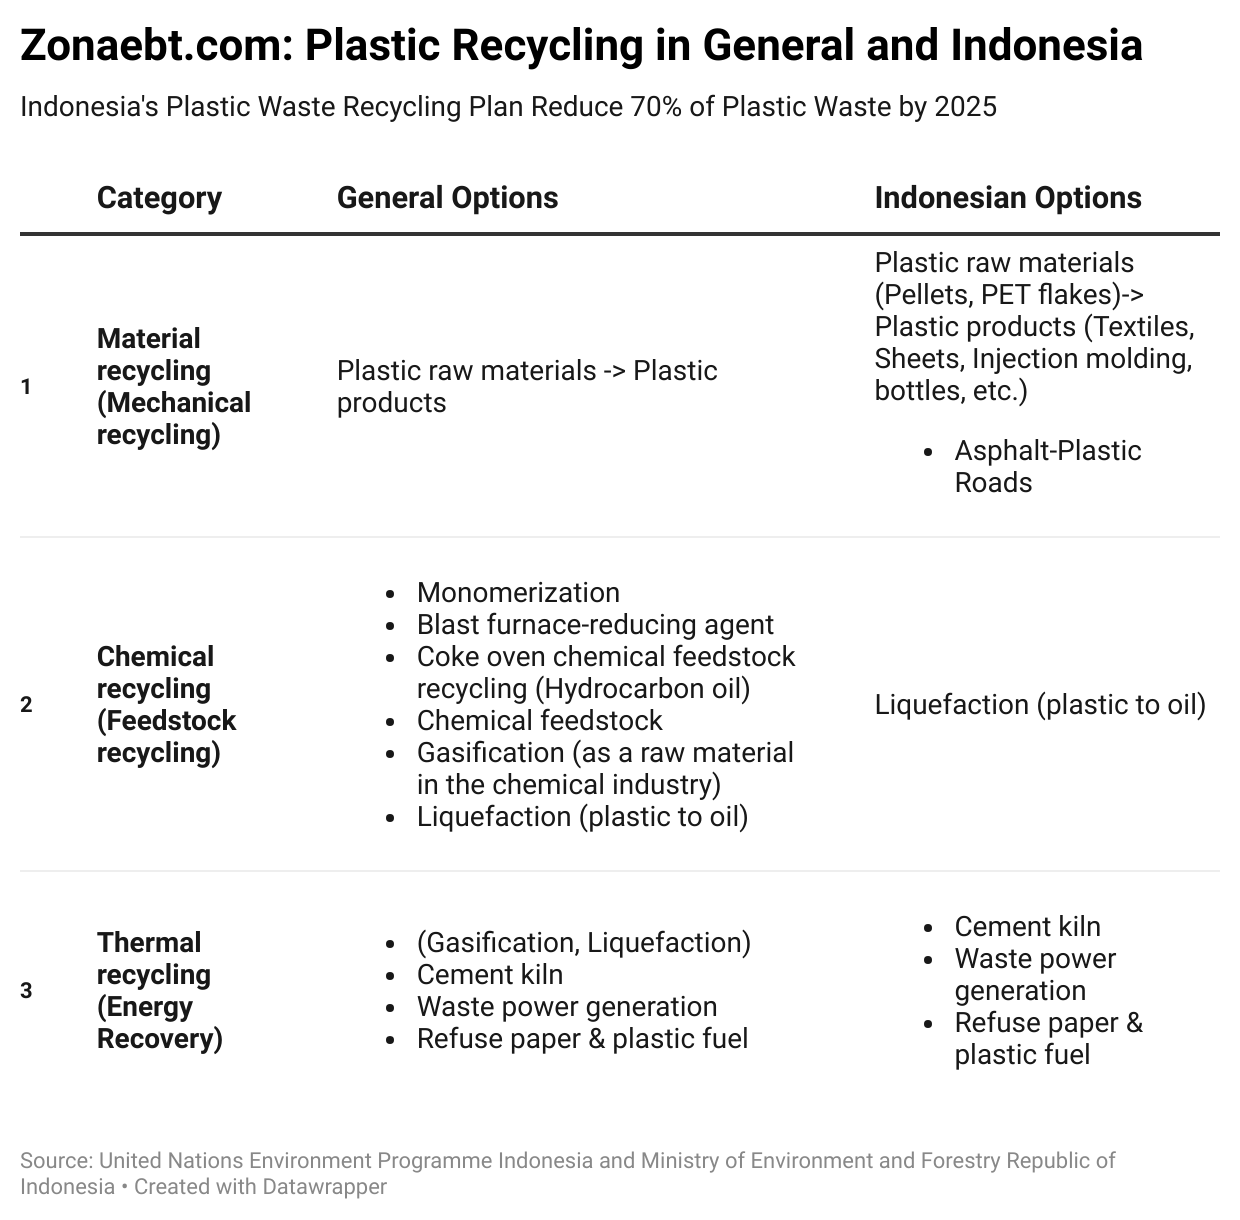 Indonesia's Plan to Reduce 70% of Plastic Waste by 2025 zonaebt.com